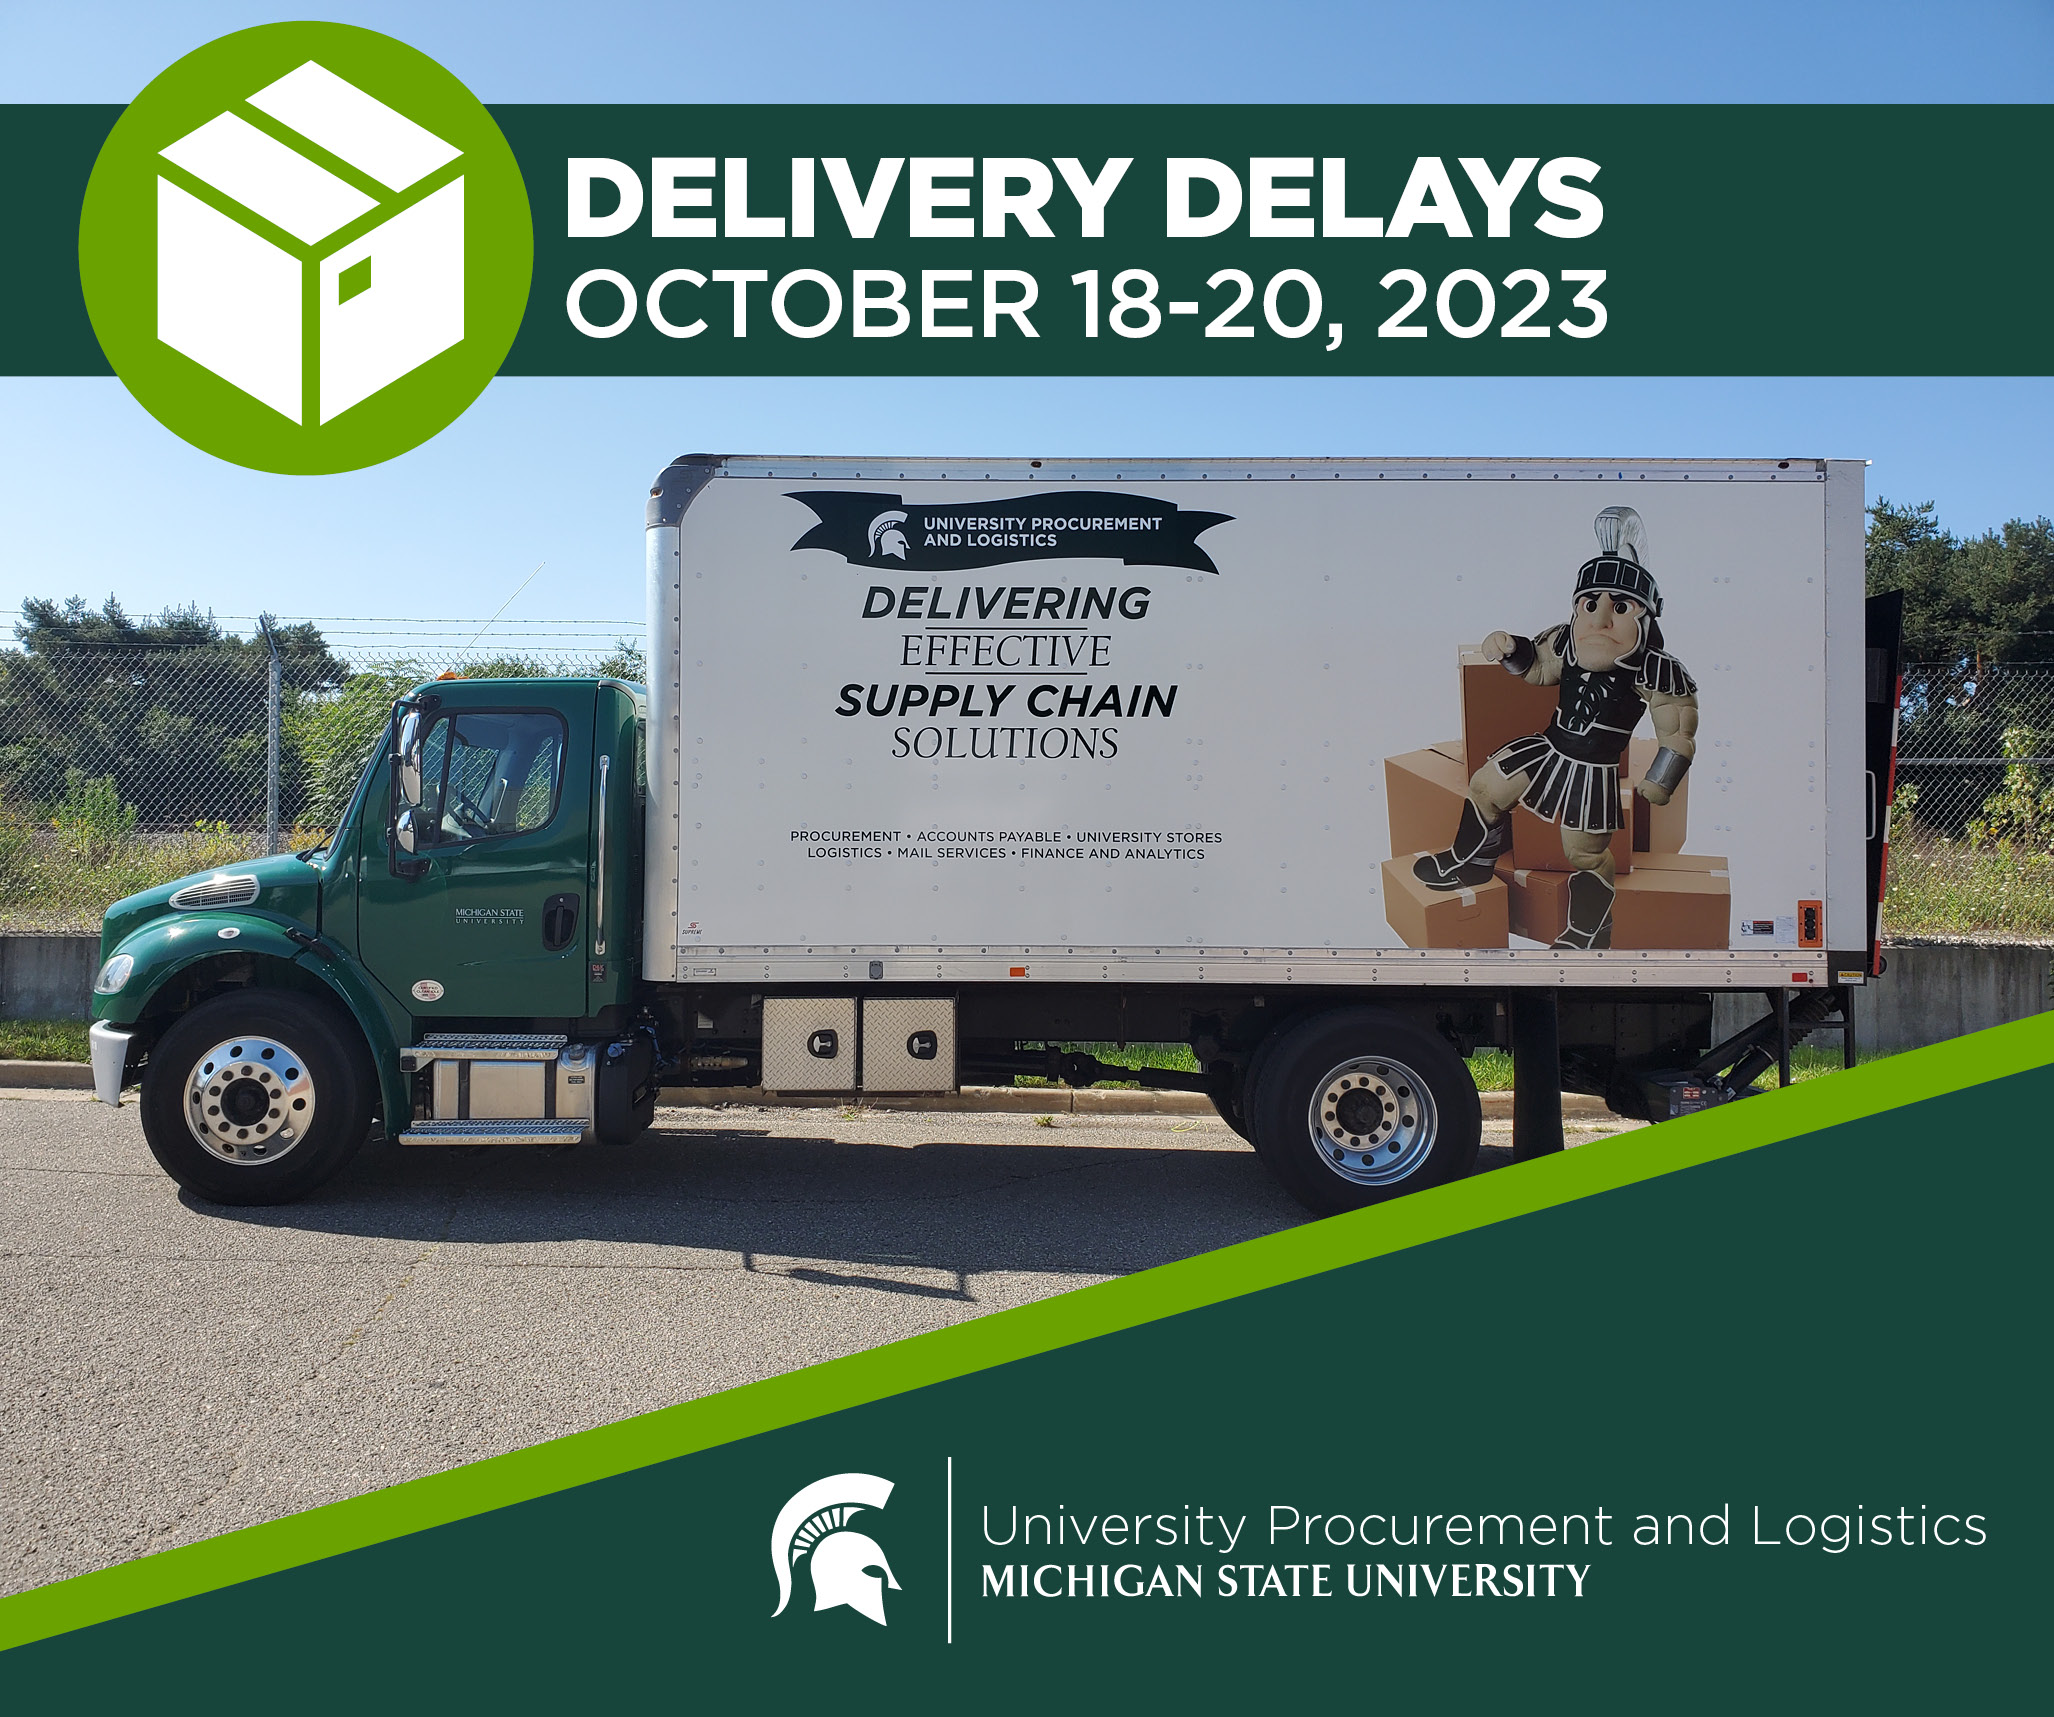 An image of a UPL delivery truck with title text above in a green banner that says "Delivery delays October 18 to 20, 2023." The UPL signature logo is displayed in the bottom right corner of the image. 